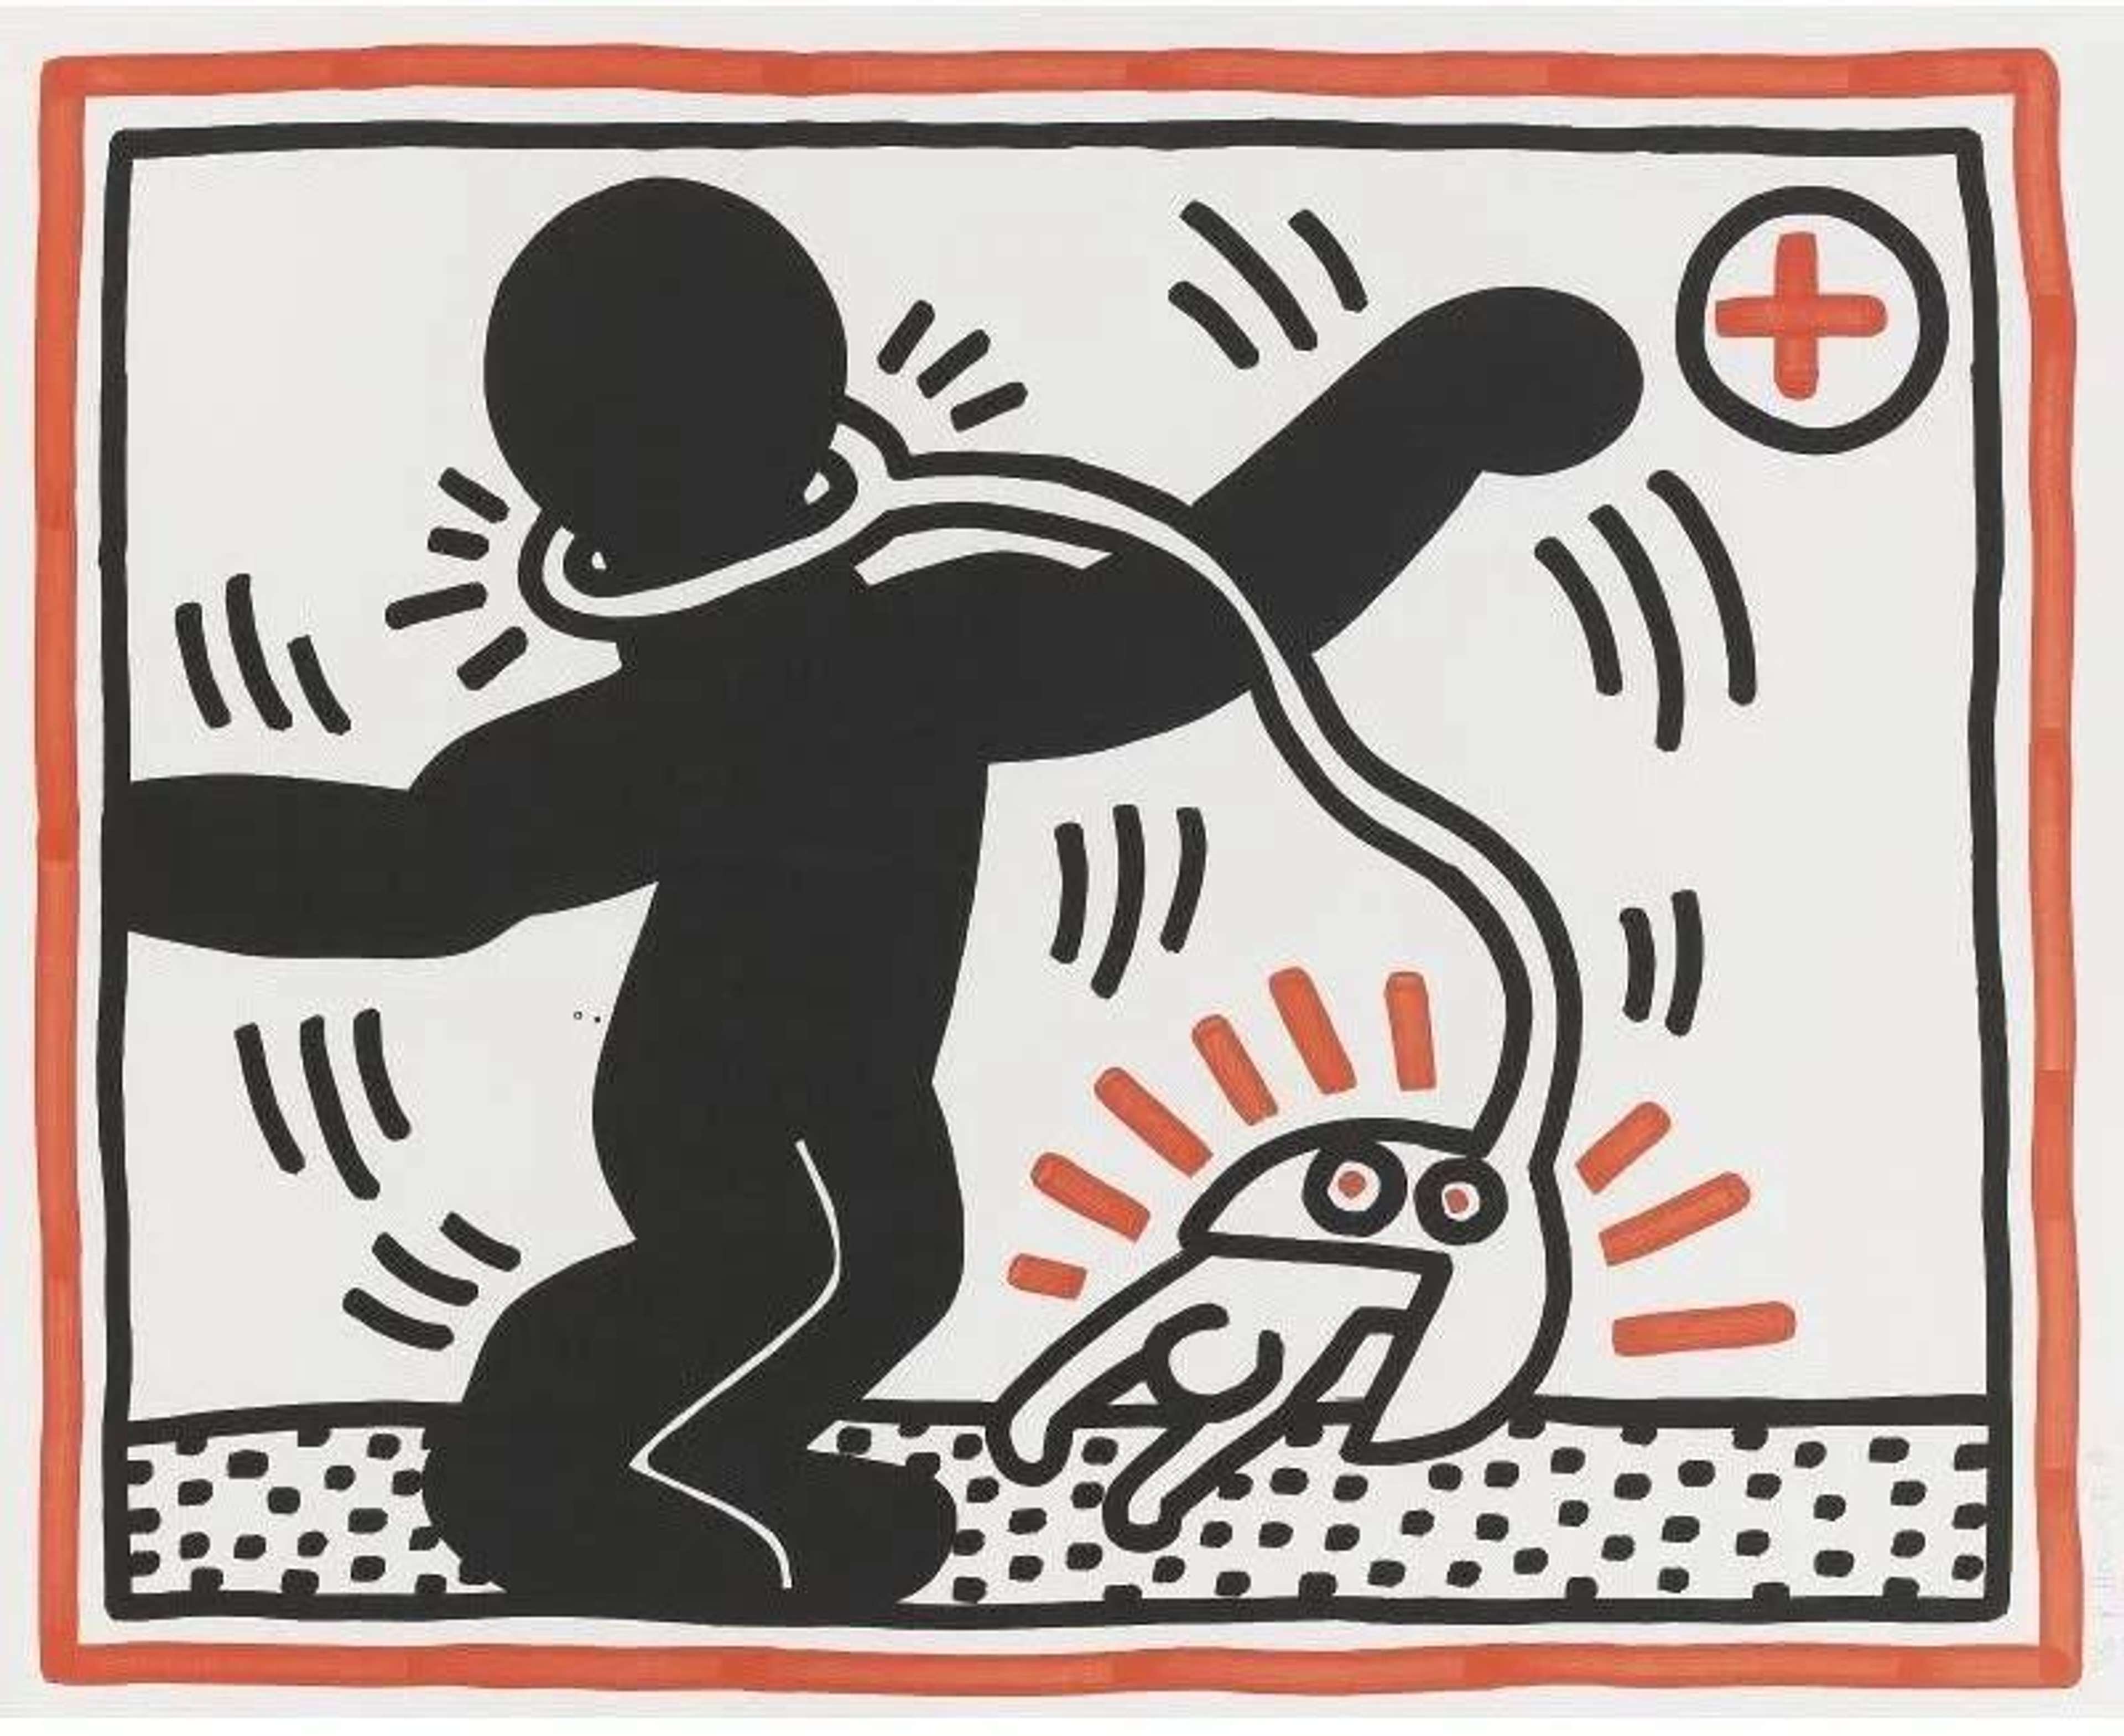 Free South Africa 1 - Signed Print by Keith Haring 1985 - MyArtBroker